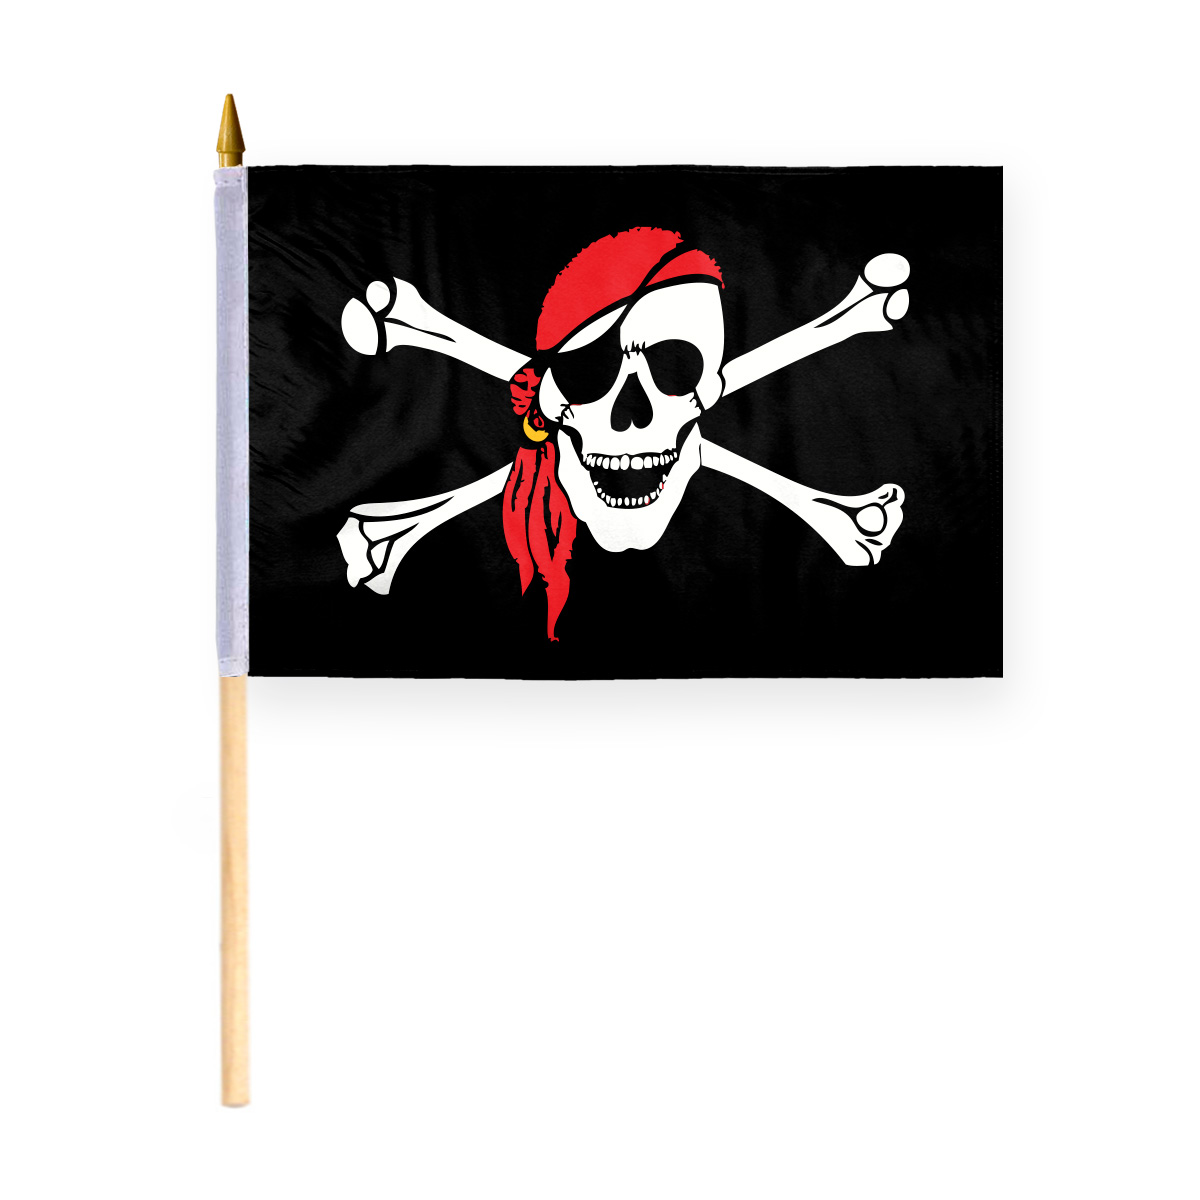 AGAS Pirate Skull & Cross Bones With Red Bandana 12" X 18" Inch Stick Flag